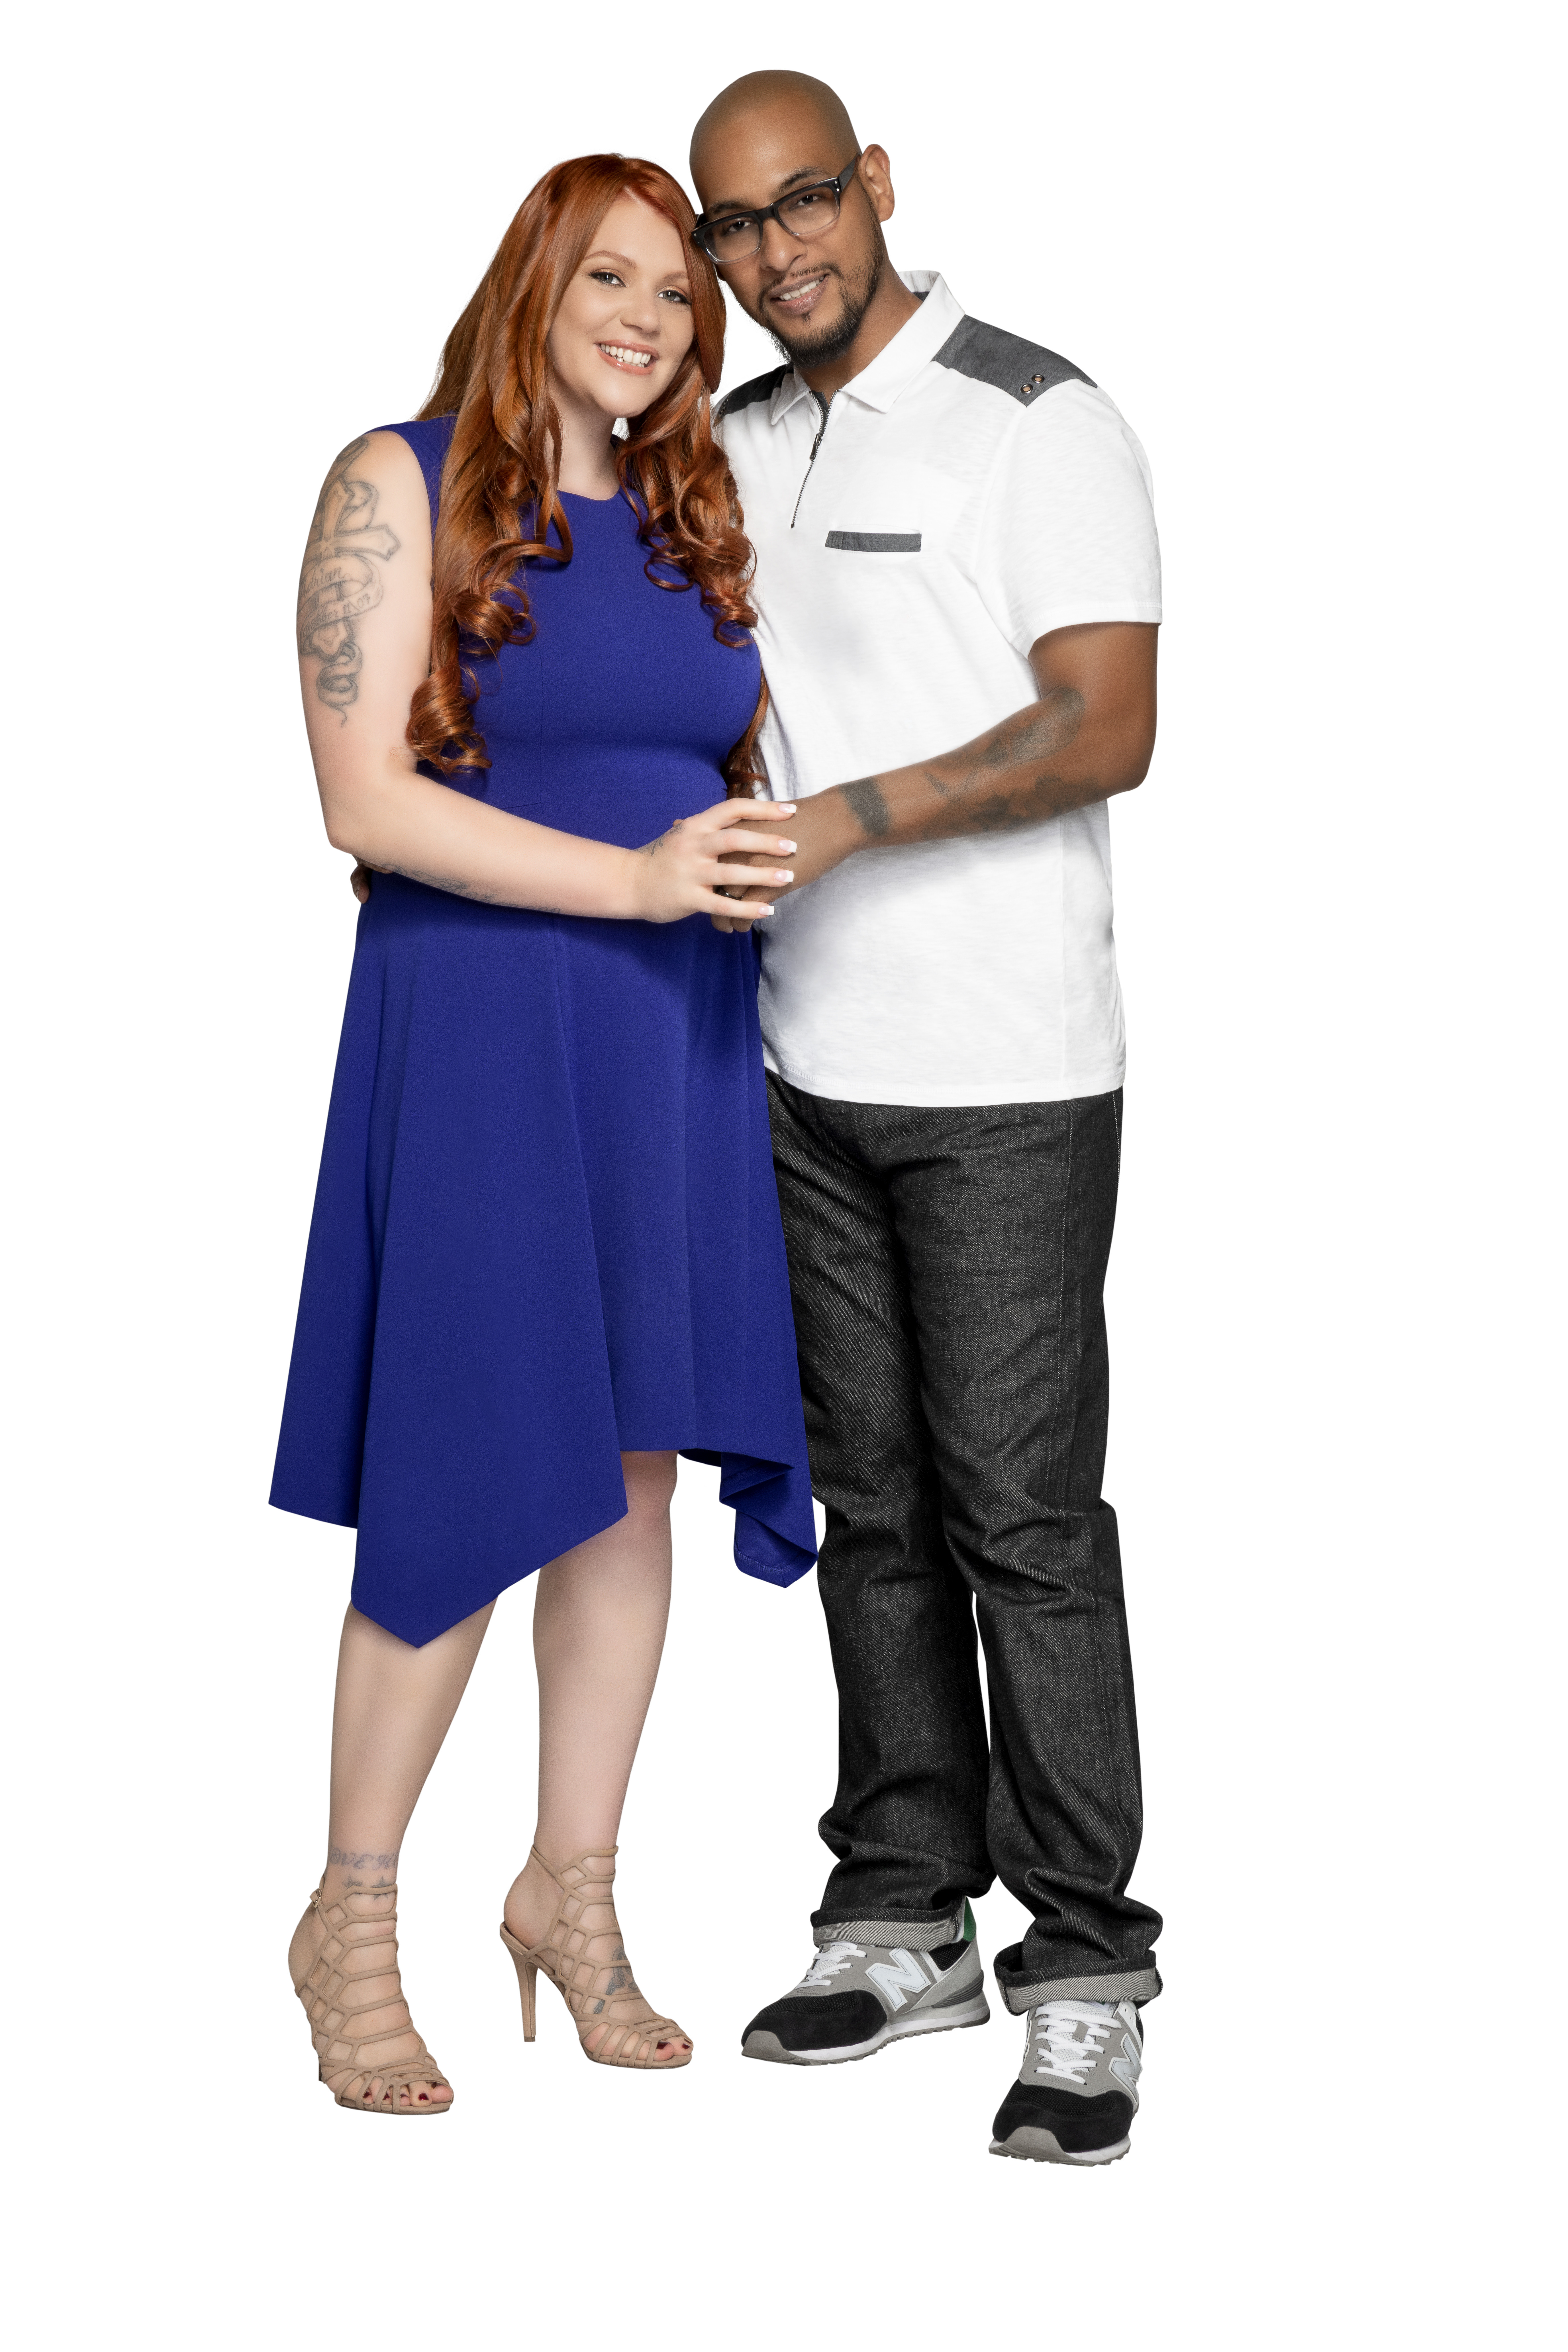 Brittney and Marcellino from "Love After Lockup"